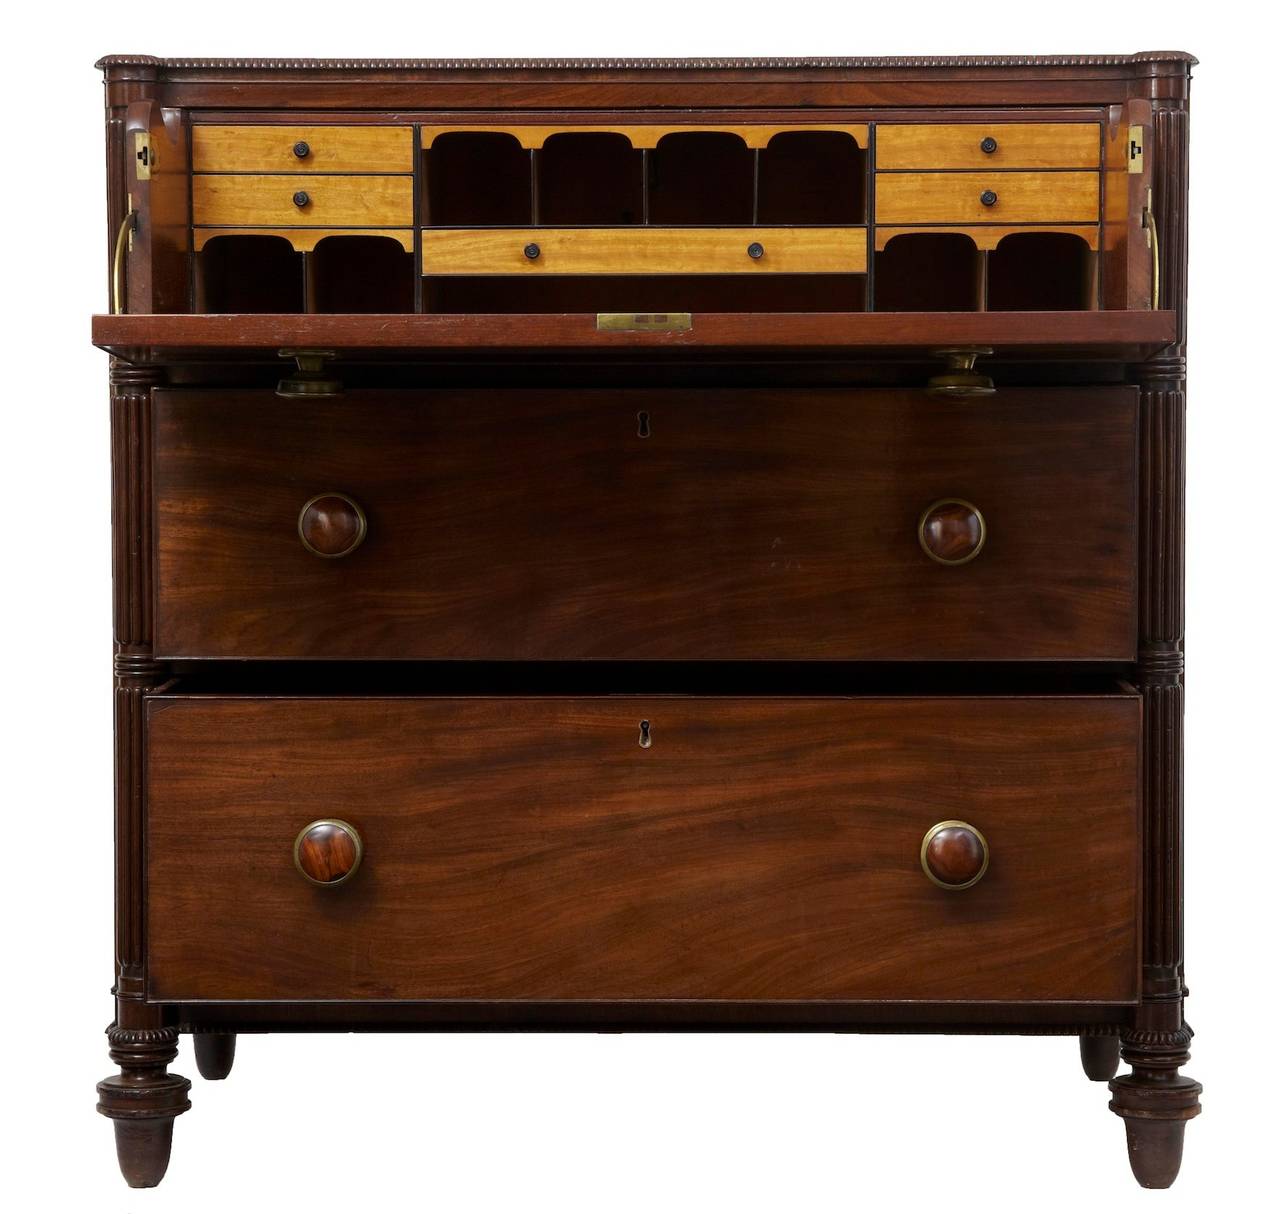 Lovely quality mahogany secretaire chest circa 1830. 

3 long drawers with original brass handles , the top drawer pullsout to reveal a pull down drawer front which has a leather writing surface. Fitted satinwood interior and ebony lined pigeon